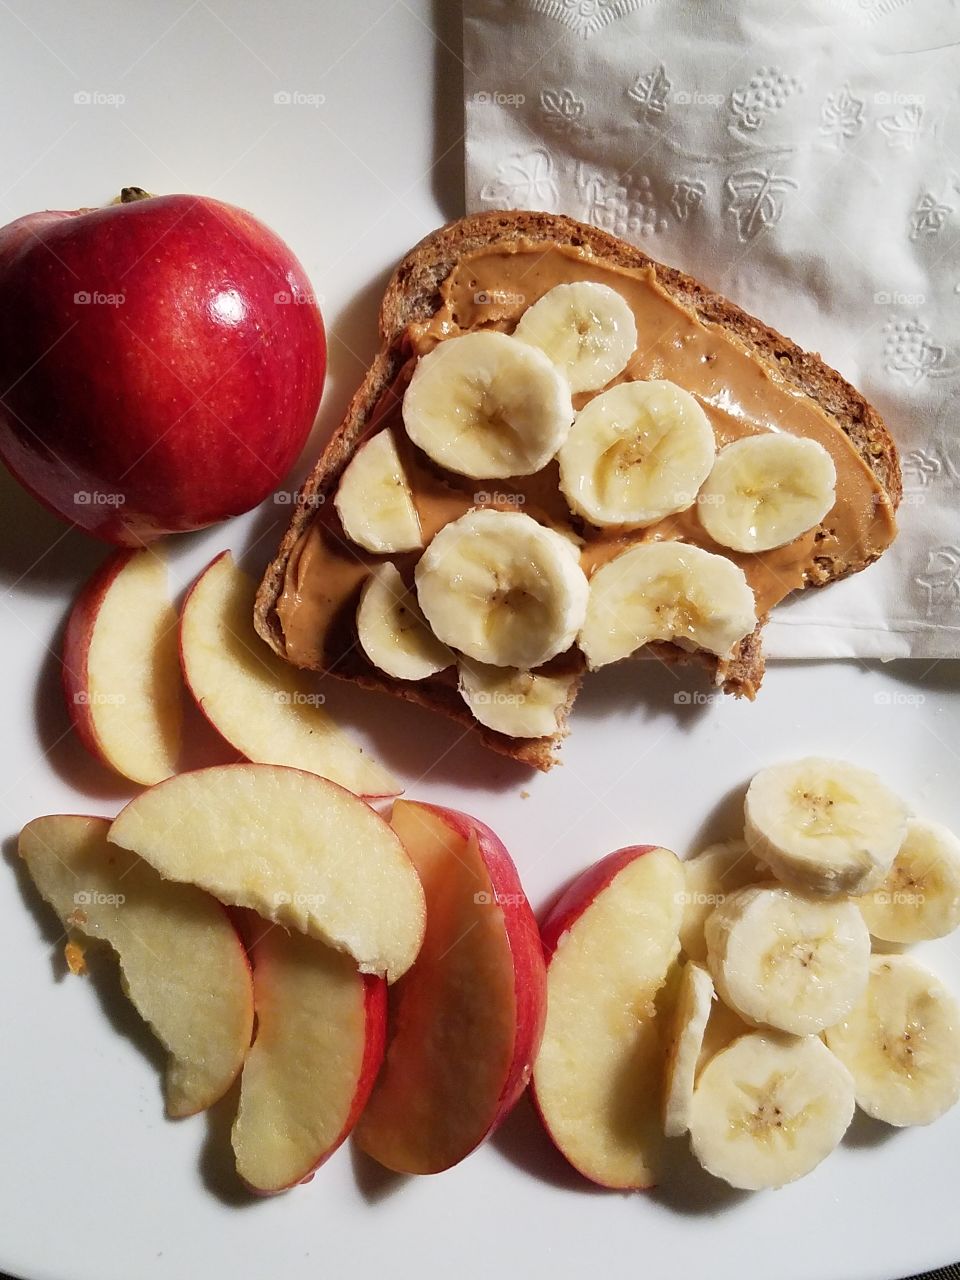 Bread with peanut butter and fruit slices